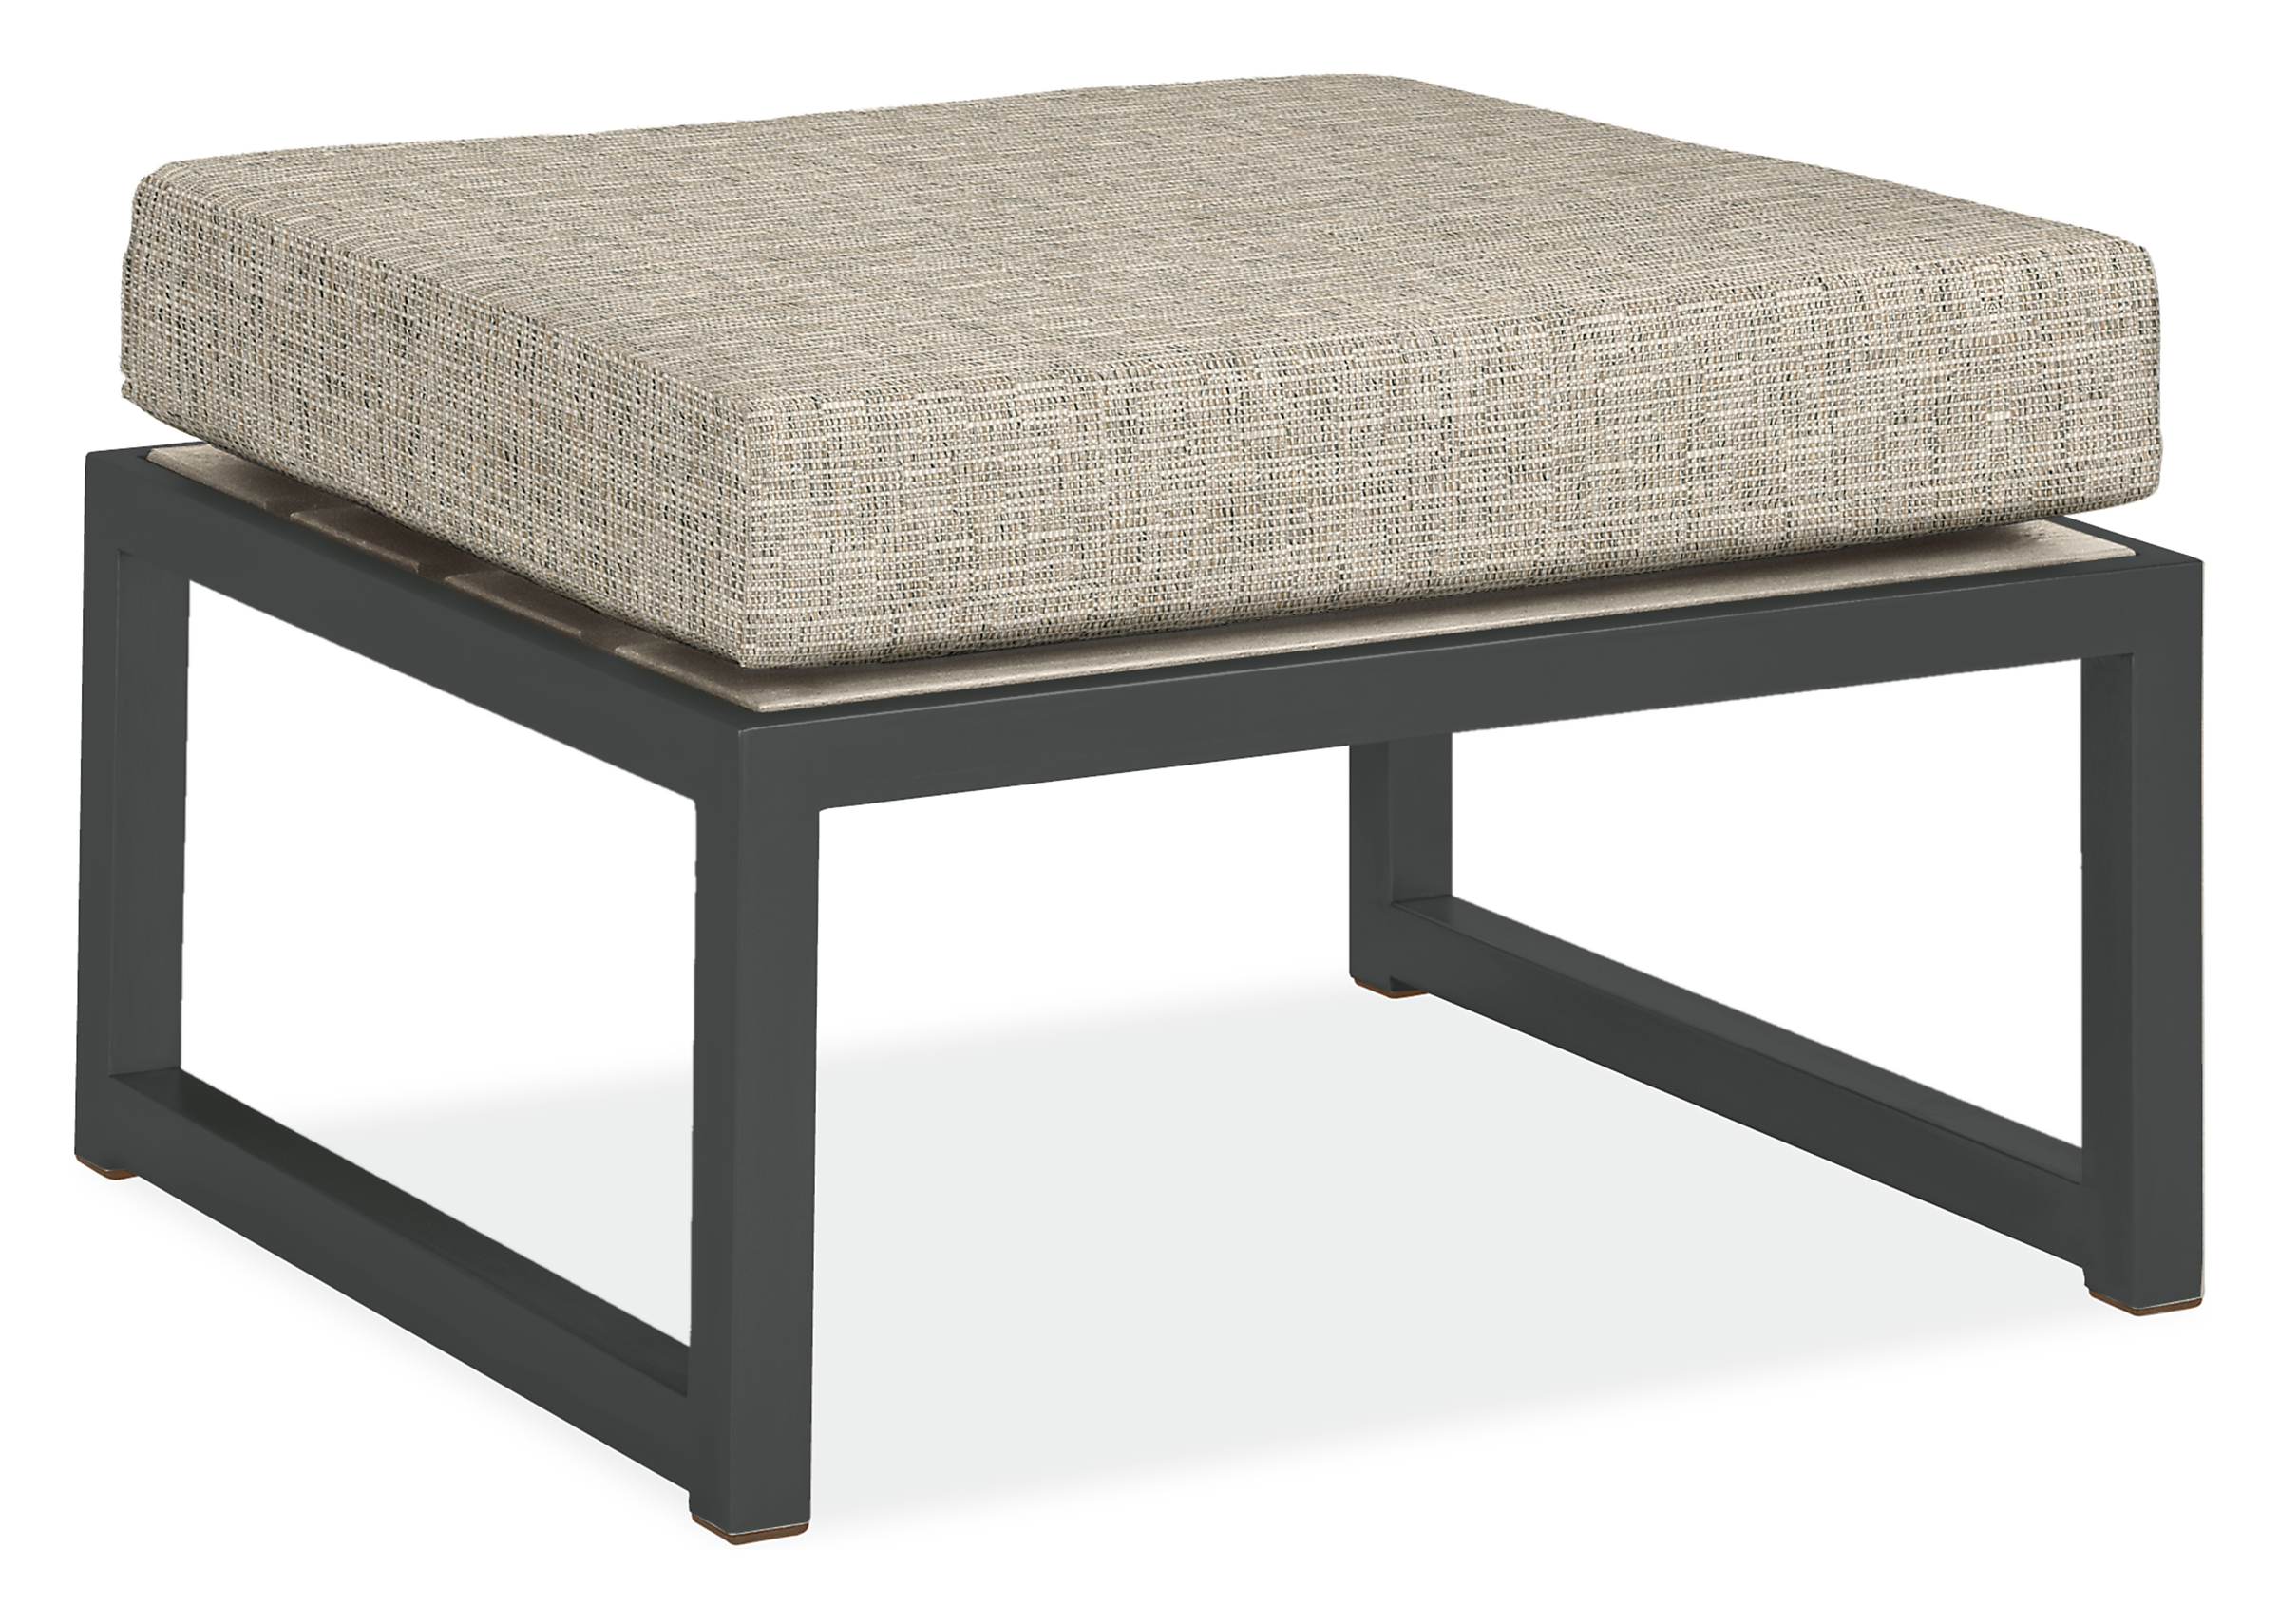 Montego Ottoman in Urban Wood with Cushion